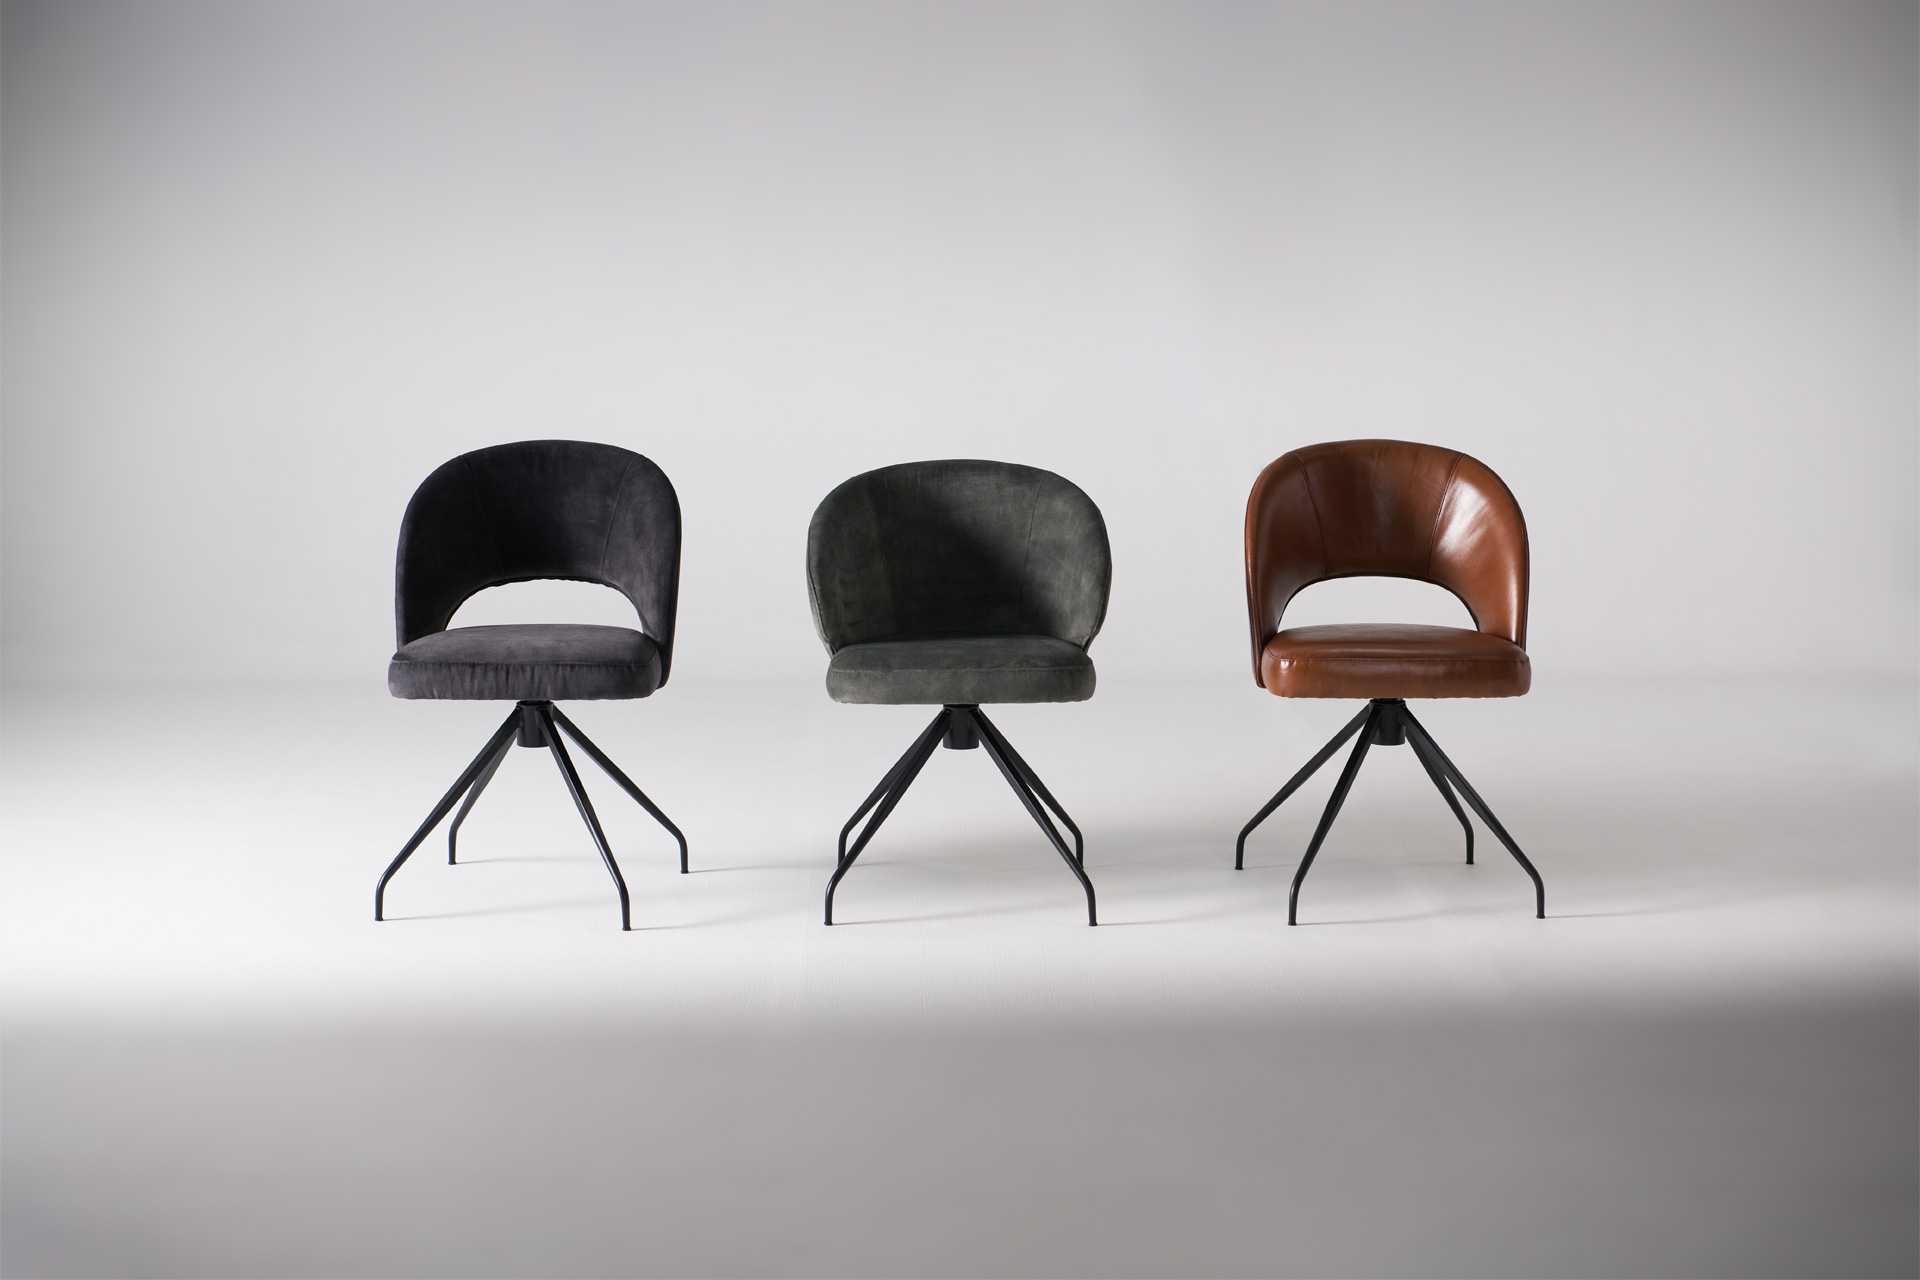 A lineup of modern design chairs.